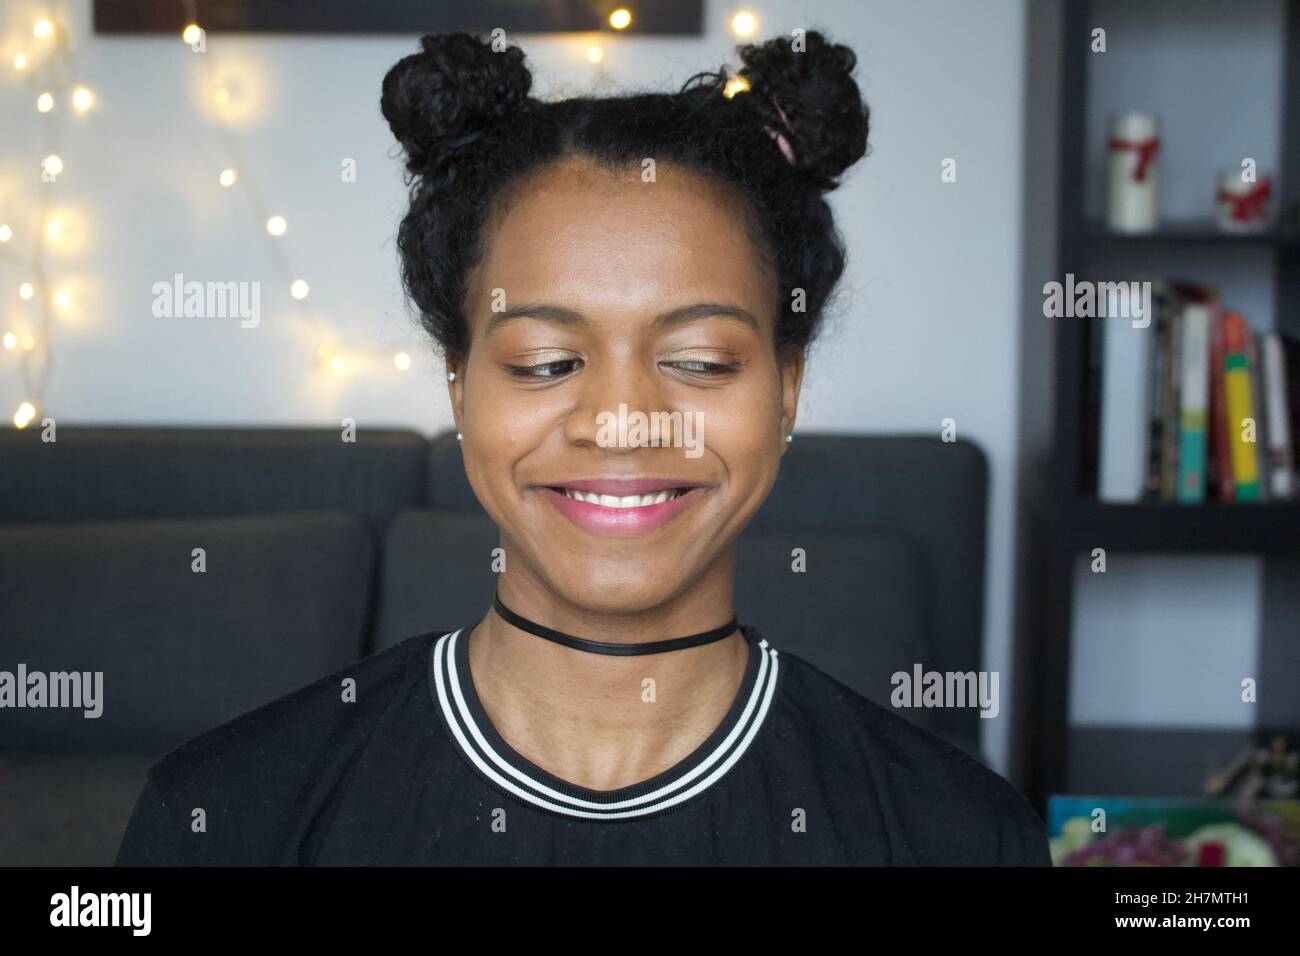 Black girl with space buns smiling whilst glancing sideways, off camera. Stock Photo